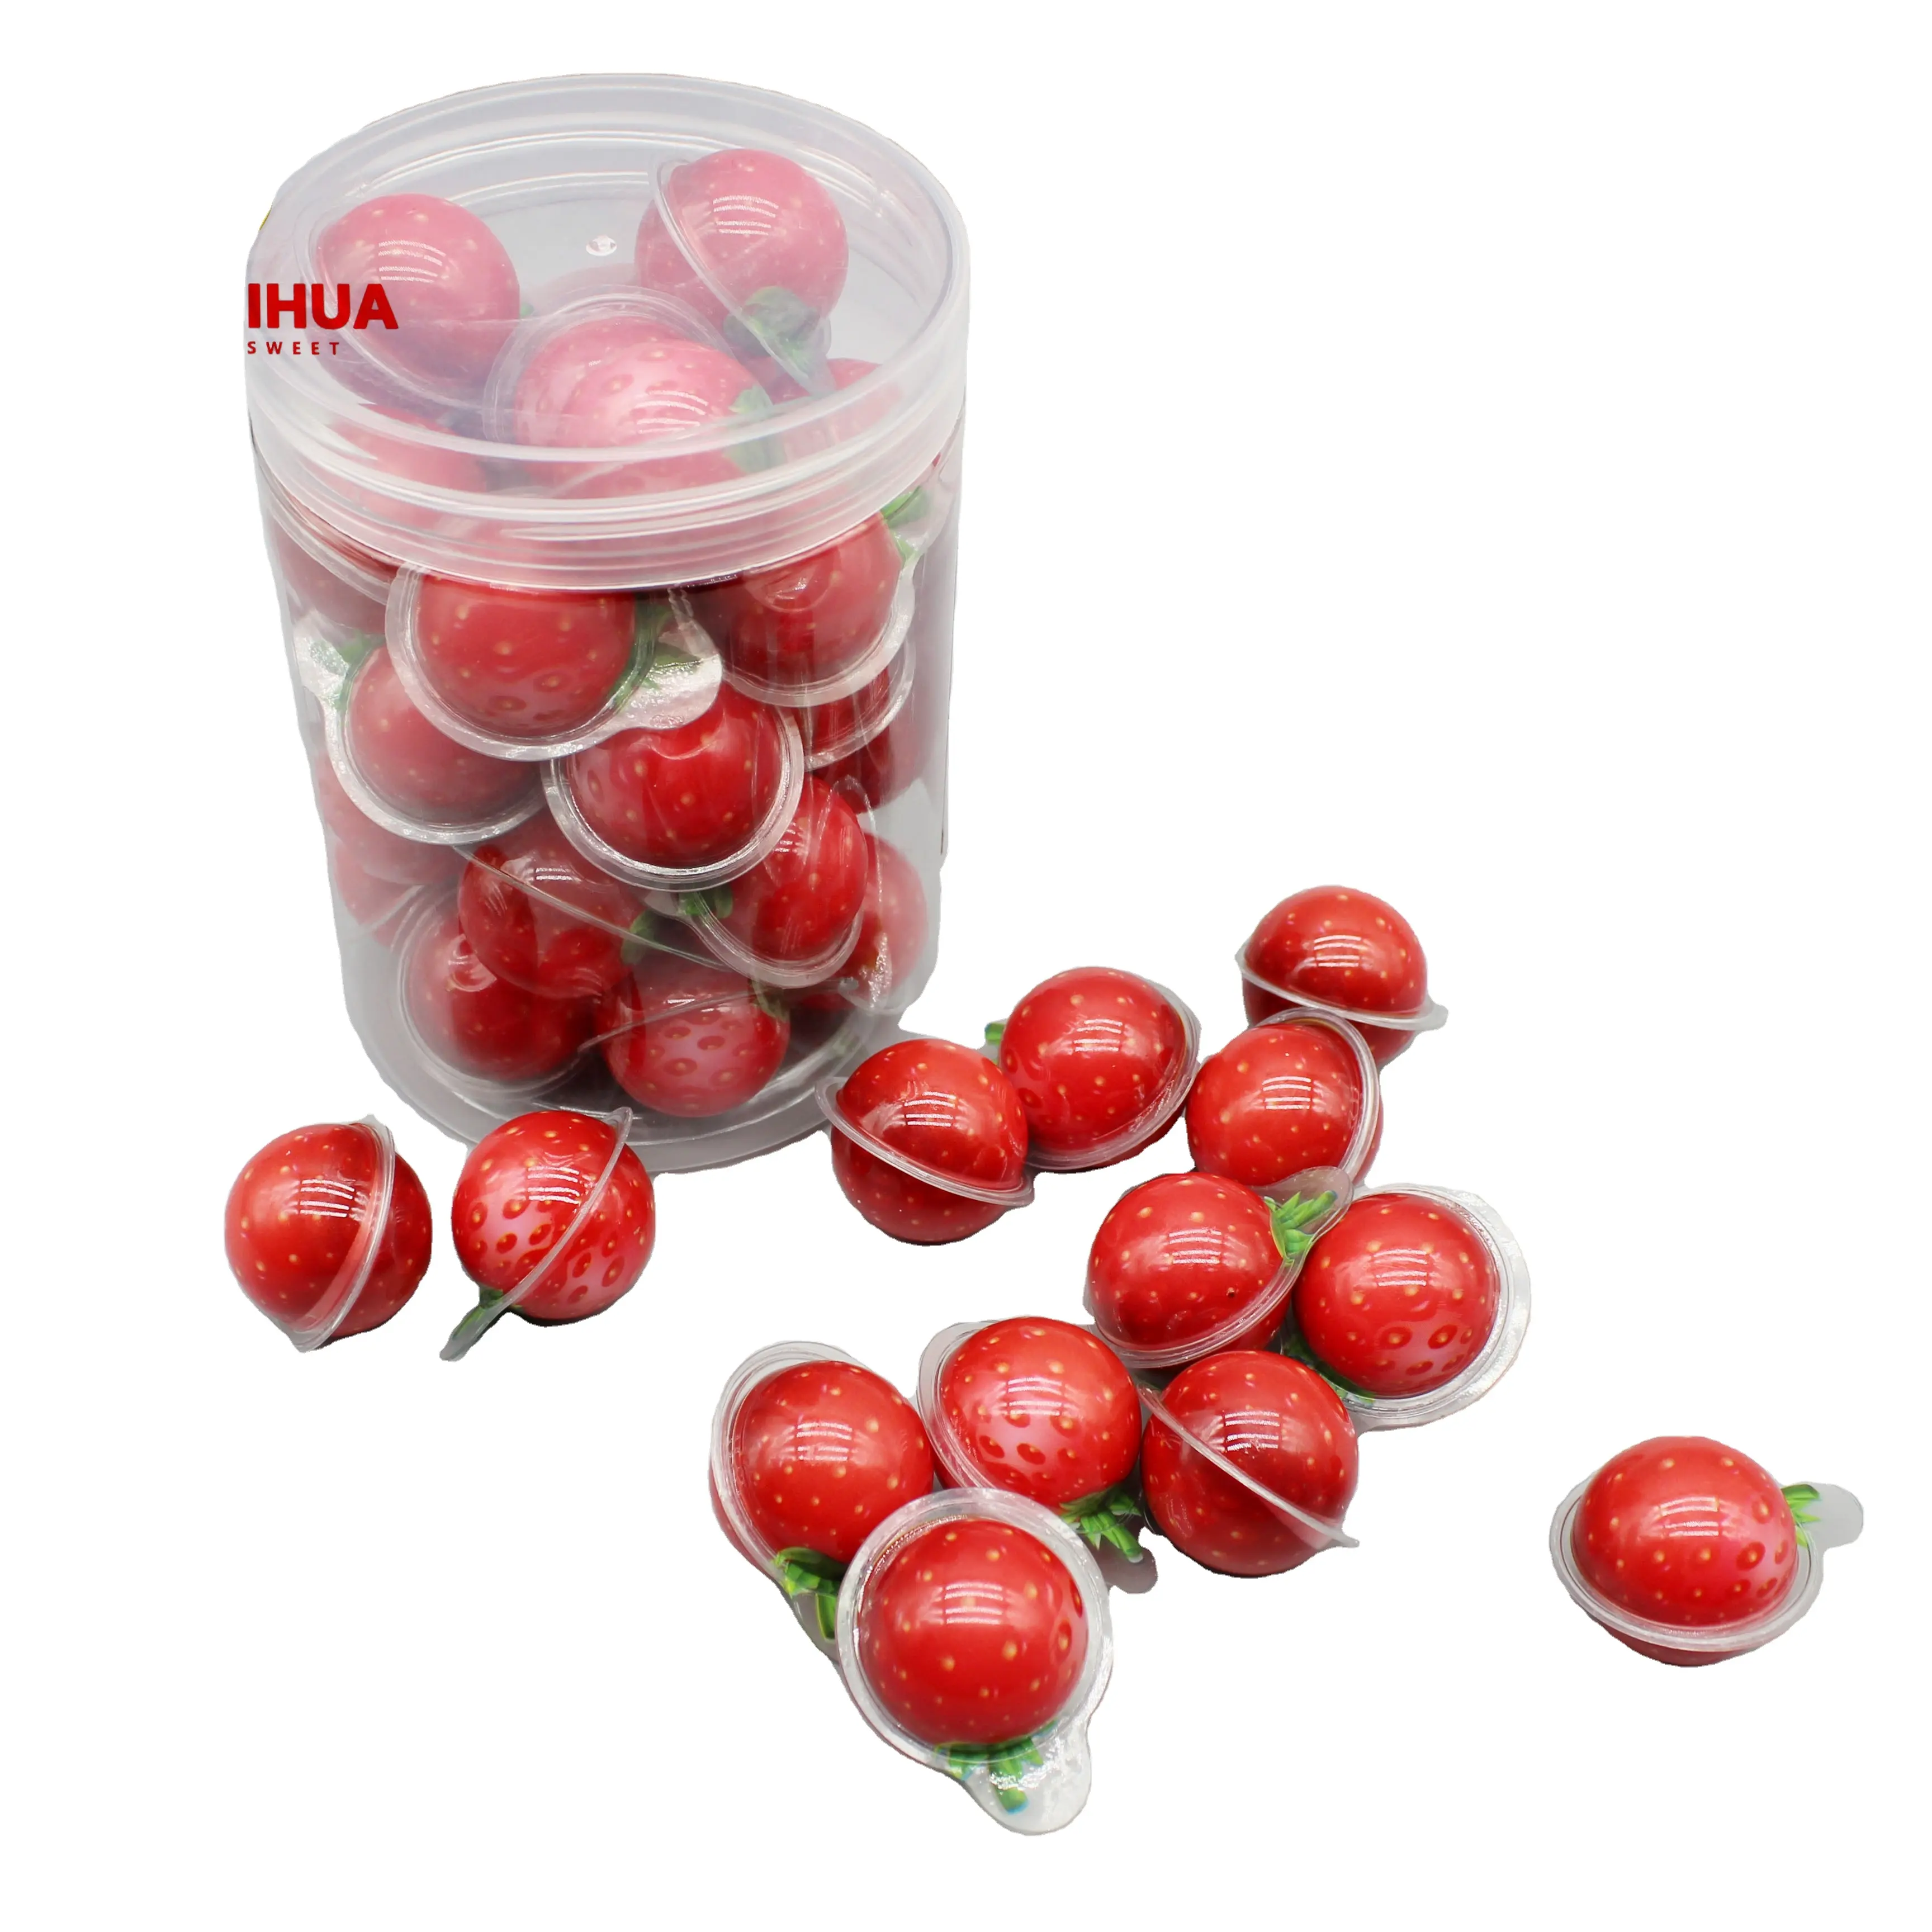 strawberry all kinds of sweet candy filling jam fruity candy factory hot sale cheap price can in bulk